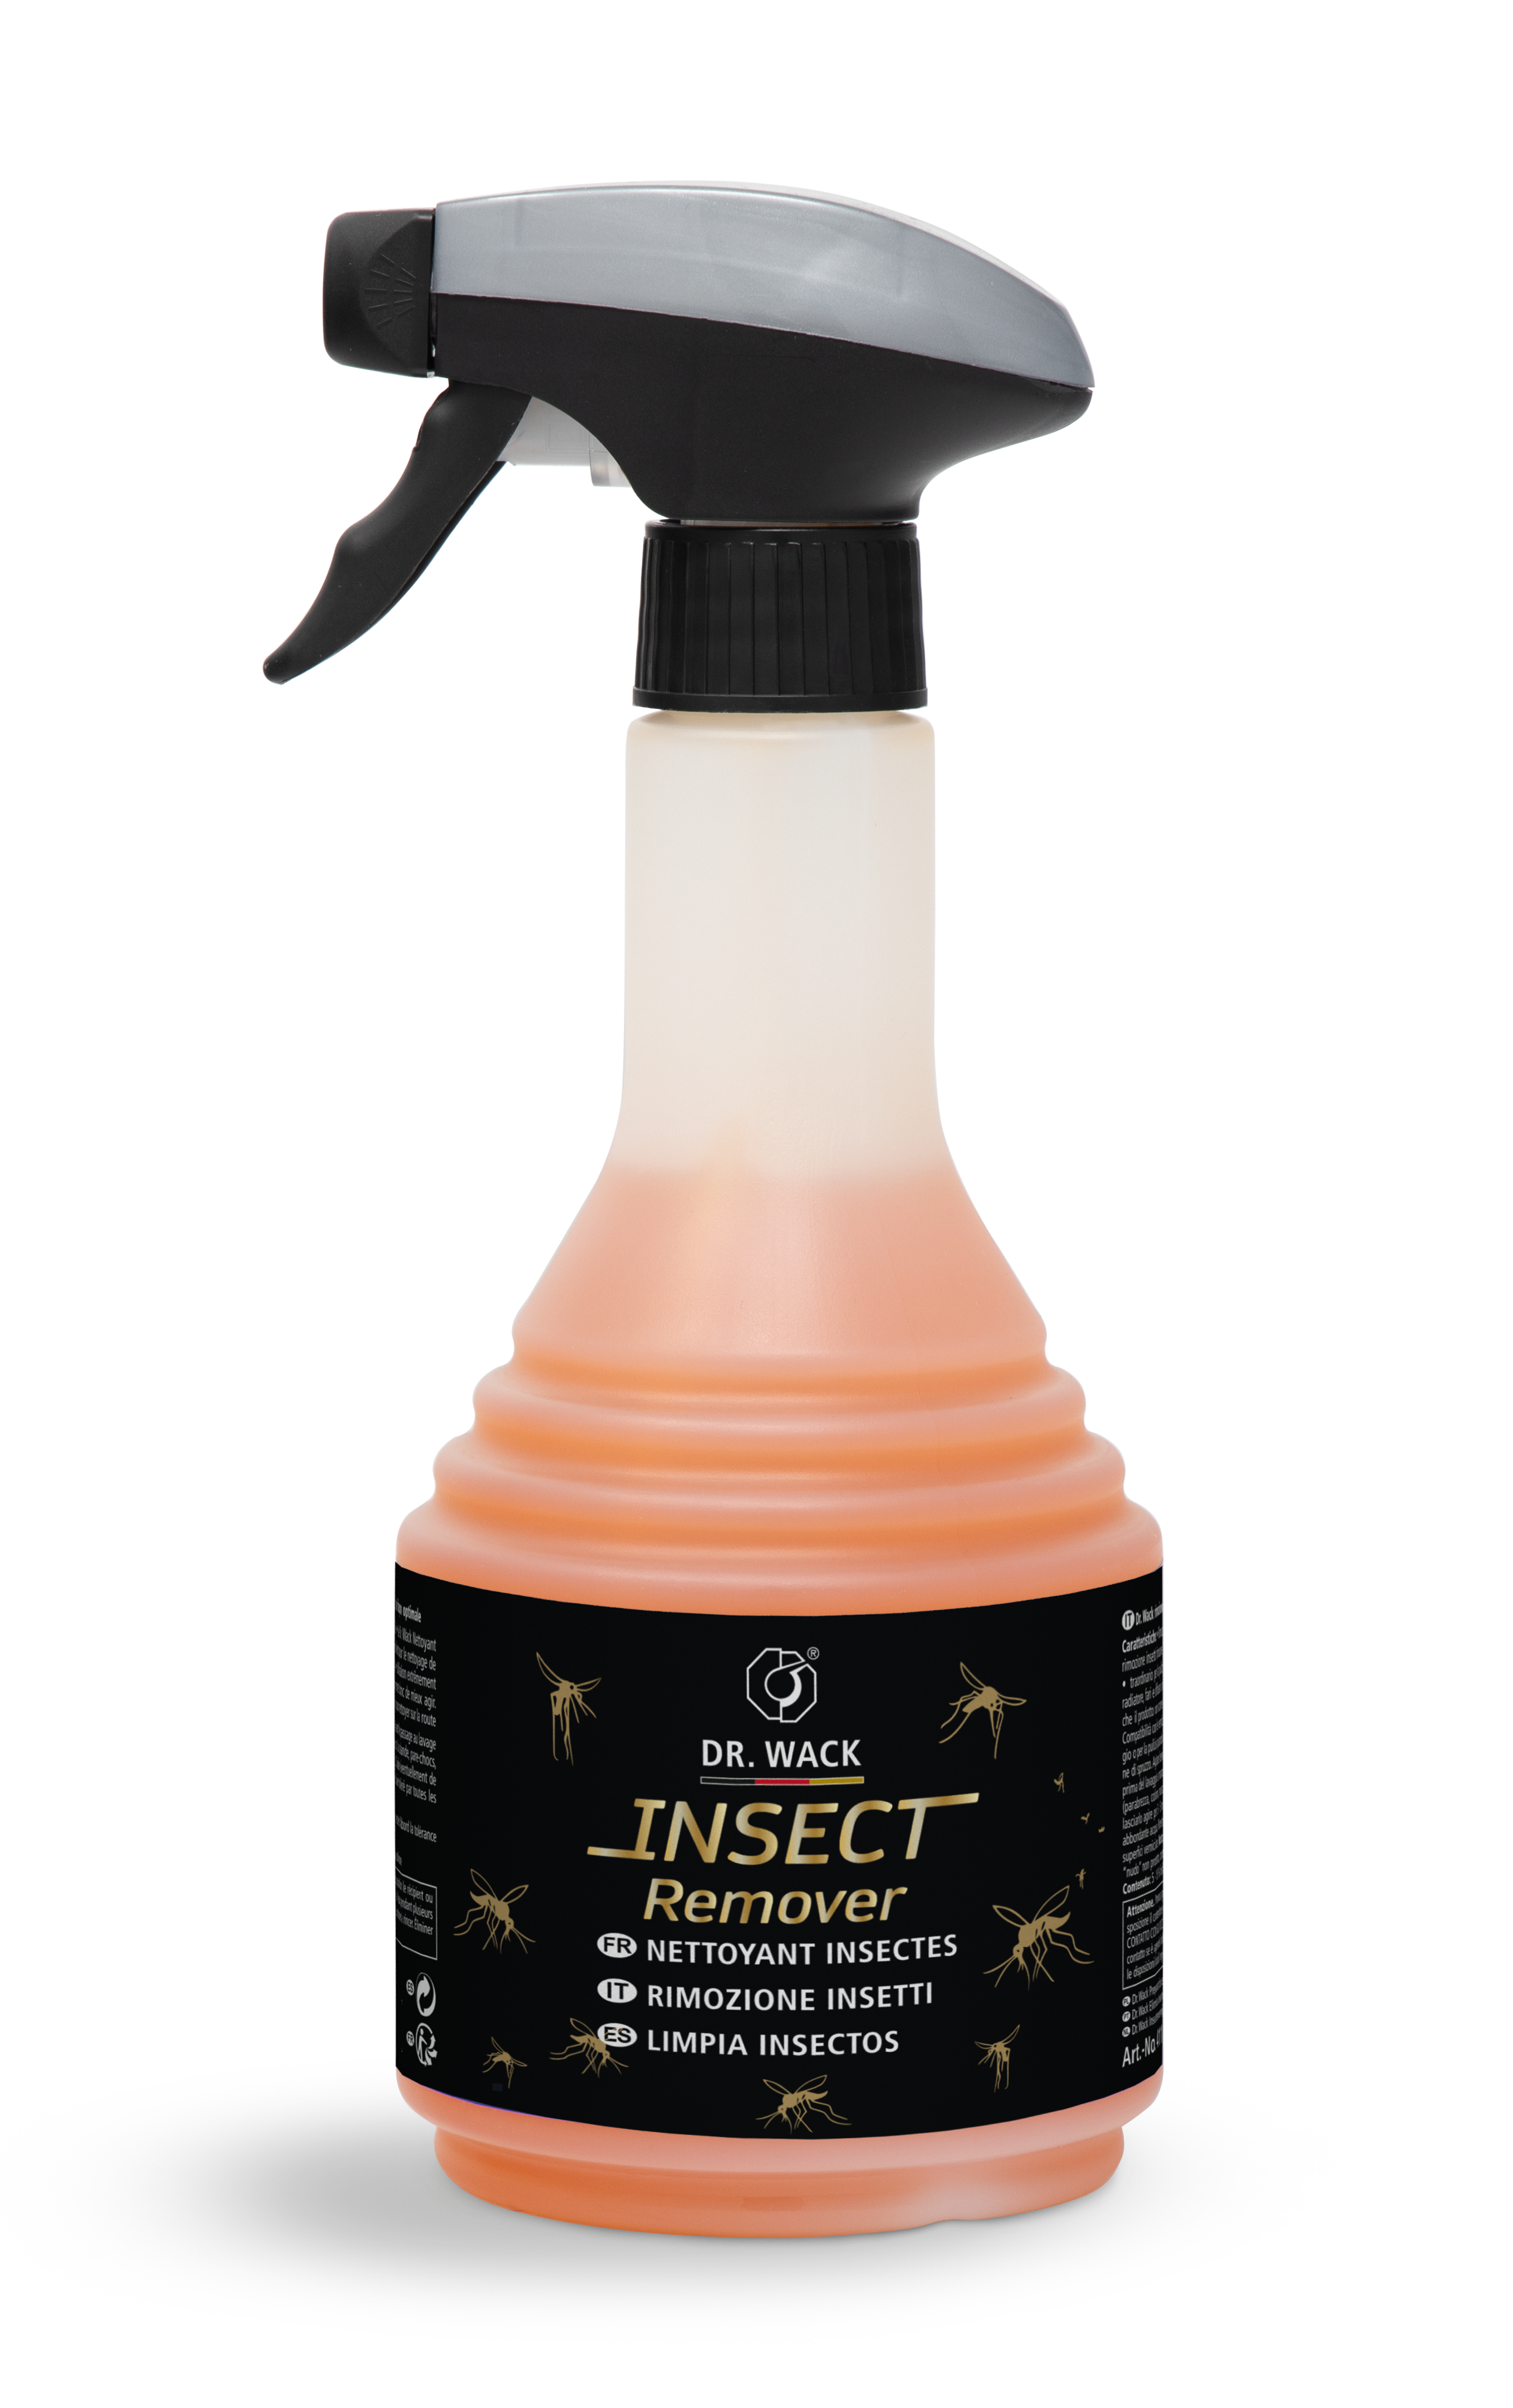 Dr. Wack Insect Remover